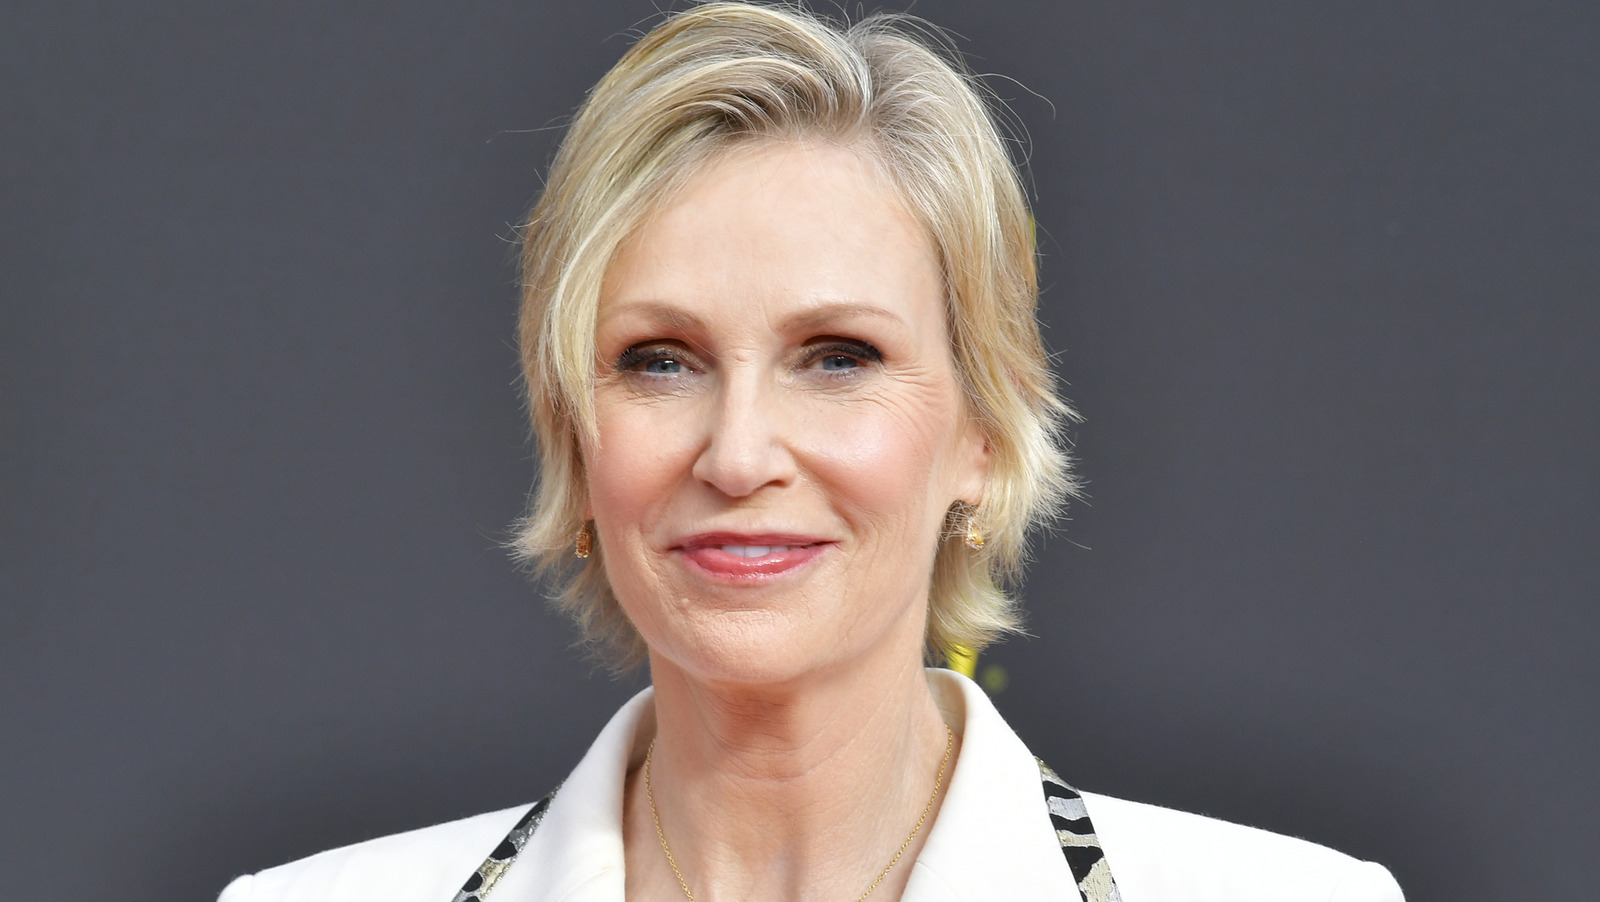 jane lynch and her wife jennifer cheyne reconnected years after their split